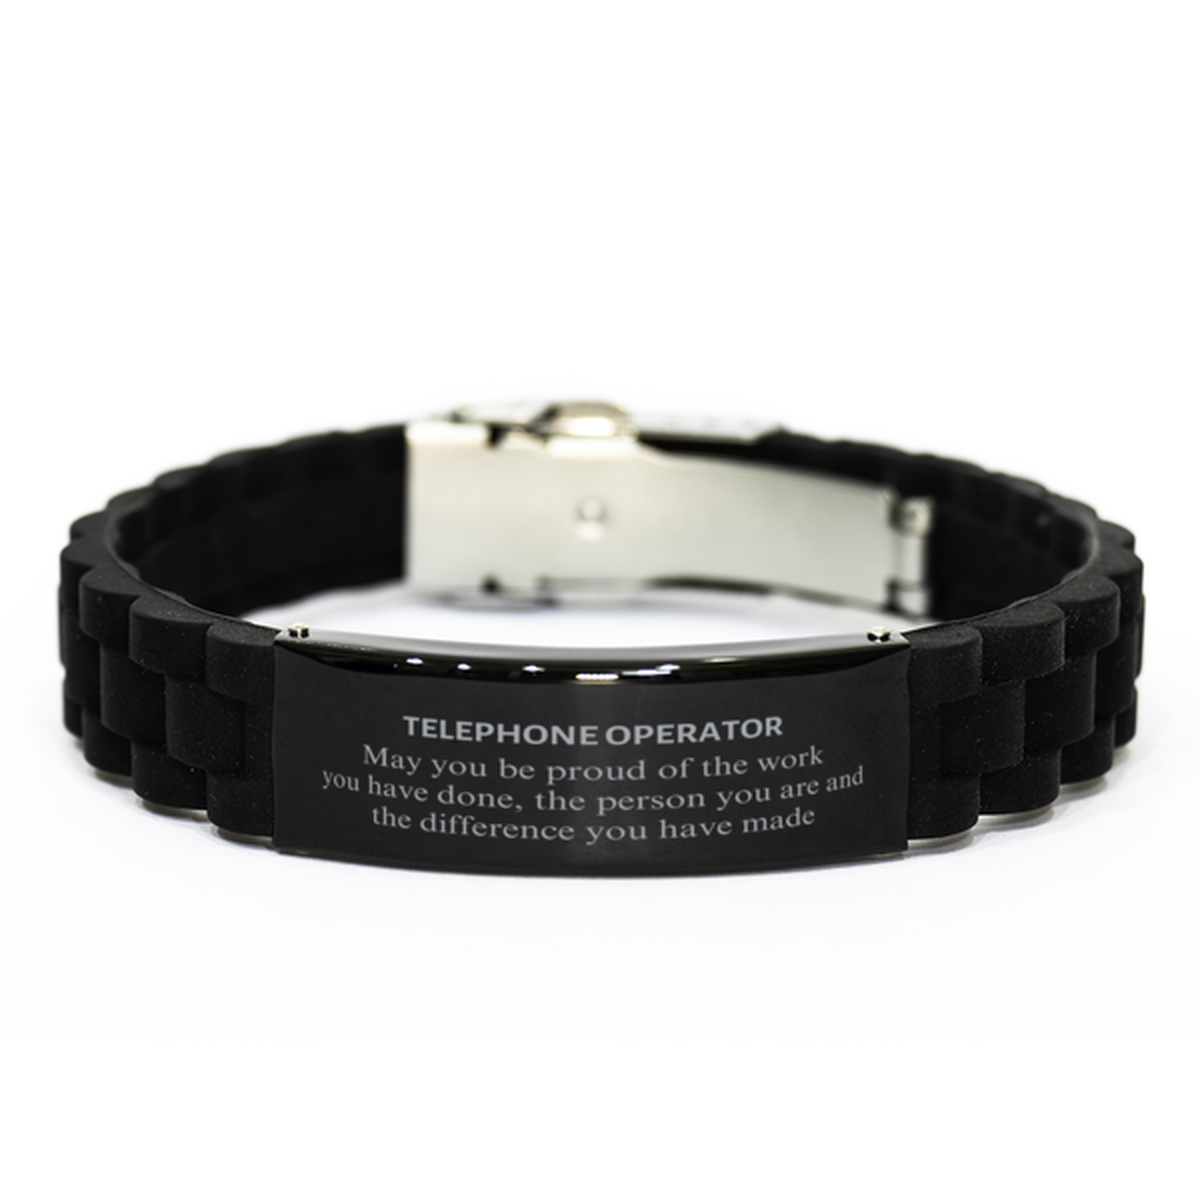 Telephone Operator May you be proud of the work you have done, Retirement Telephone Operator Black Glidelock Clasp Bracelet for Colleague Appreciation Gifts Amazing for Telephone Operator